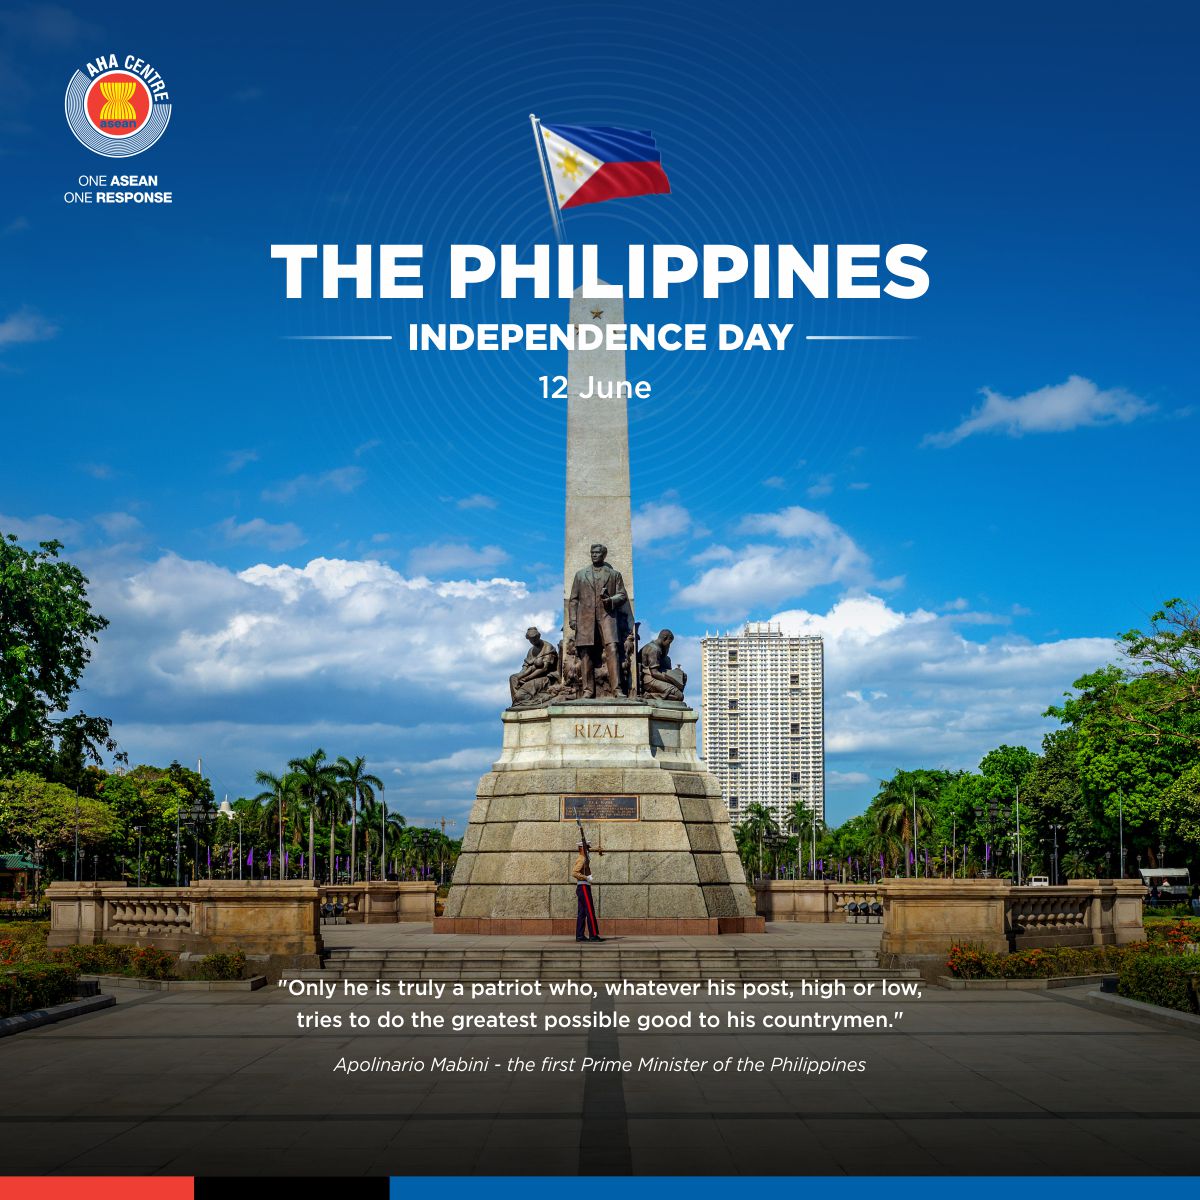 Aha Centre Happy Independence Day To Our Friends In The Philippines The Philippines Observed On June 12 Commemoration Of The Declaration Of Philippine Independence From Spain In 18 T Co Vwxy0ycwcg